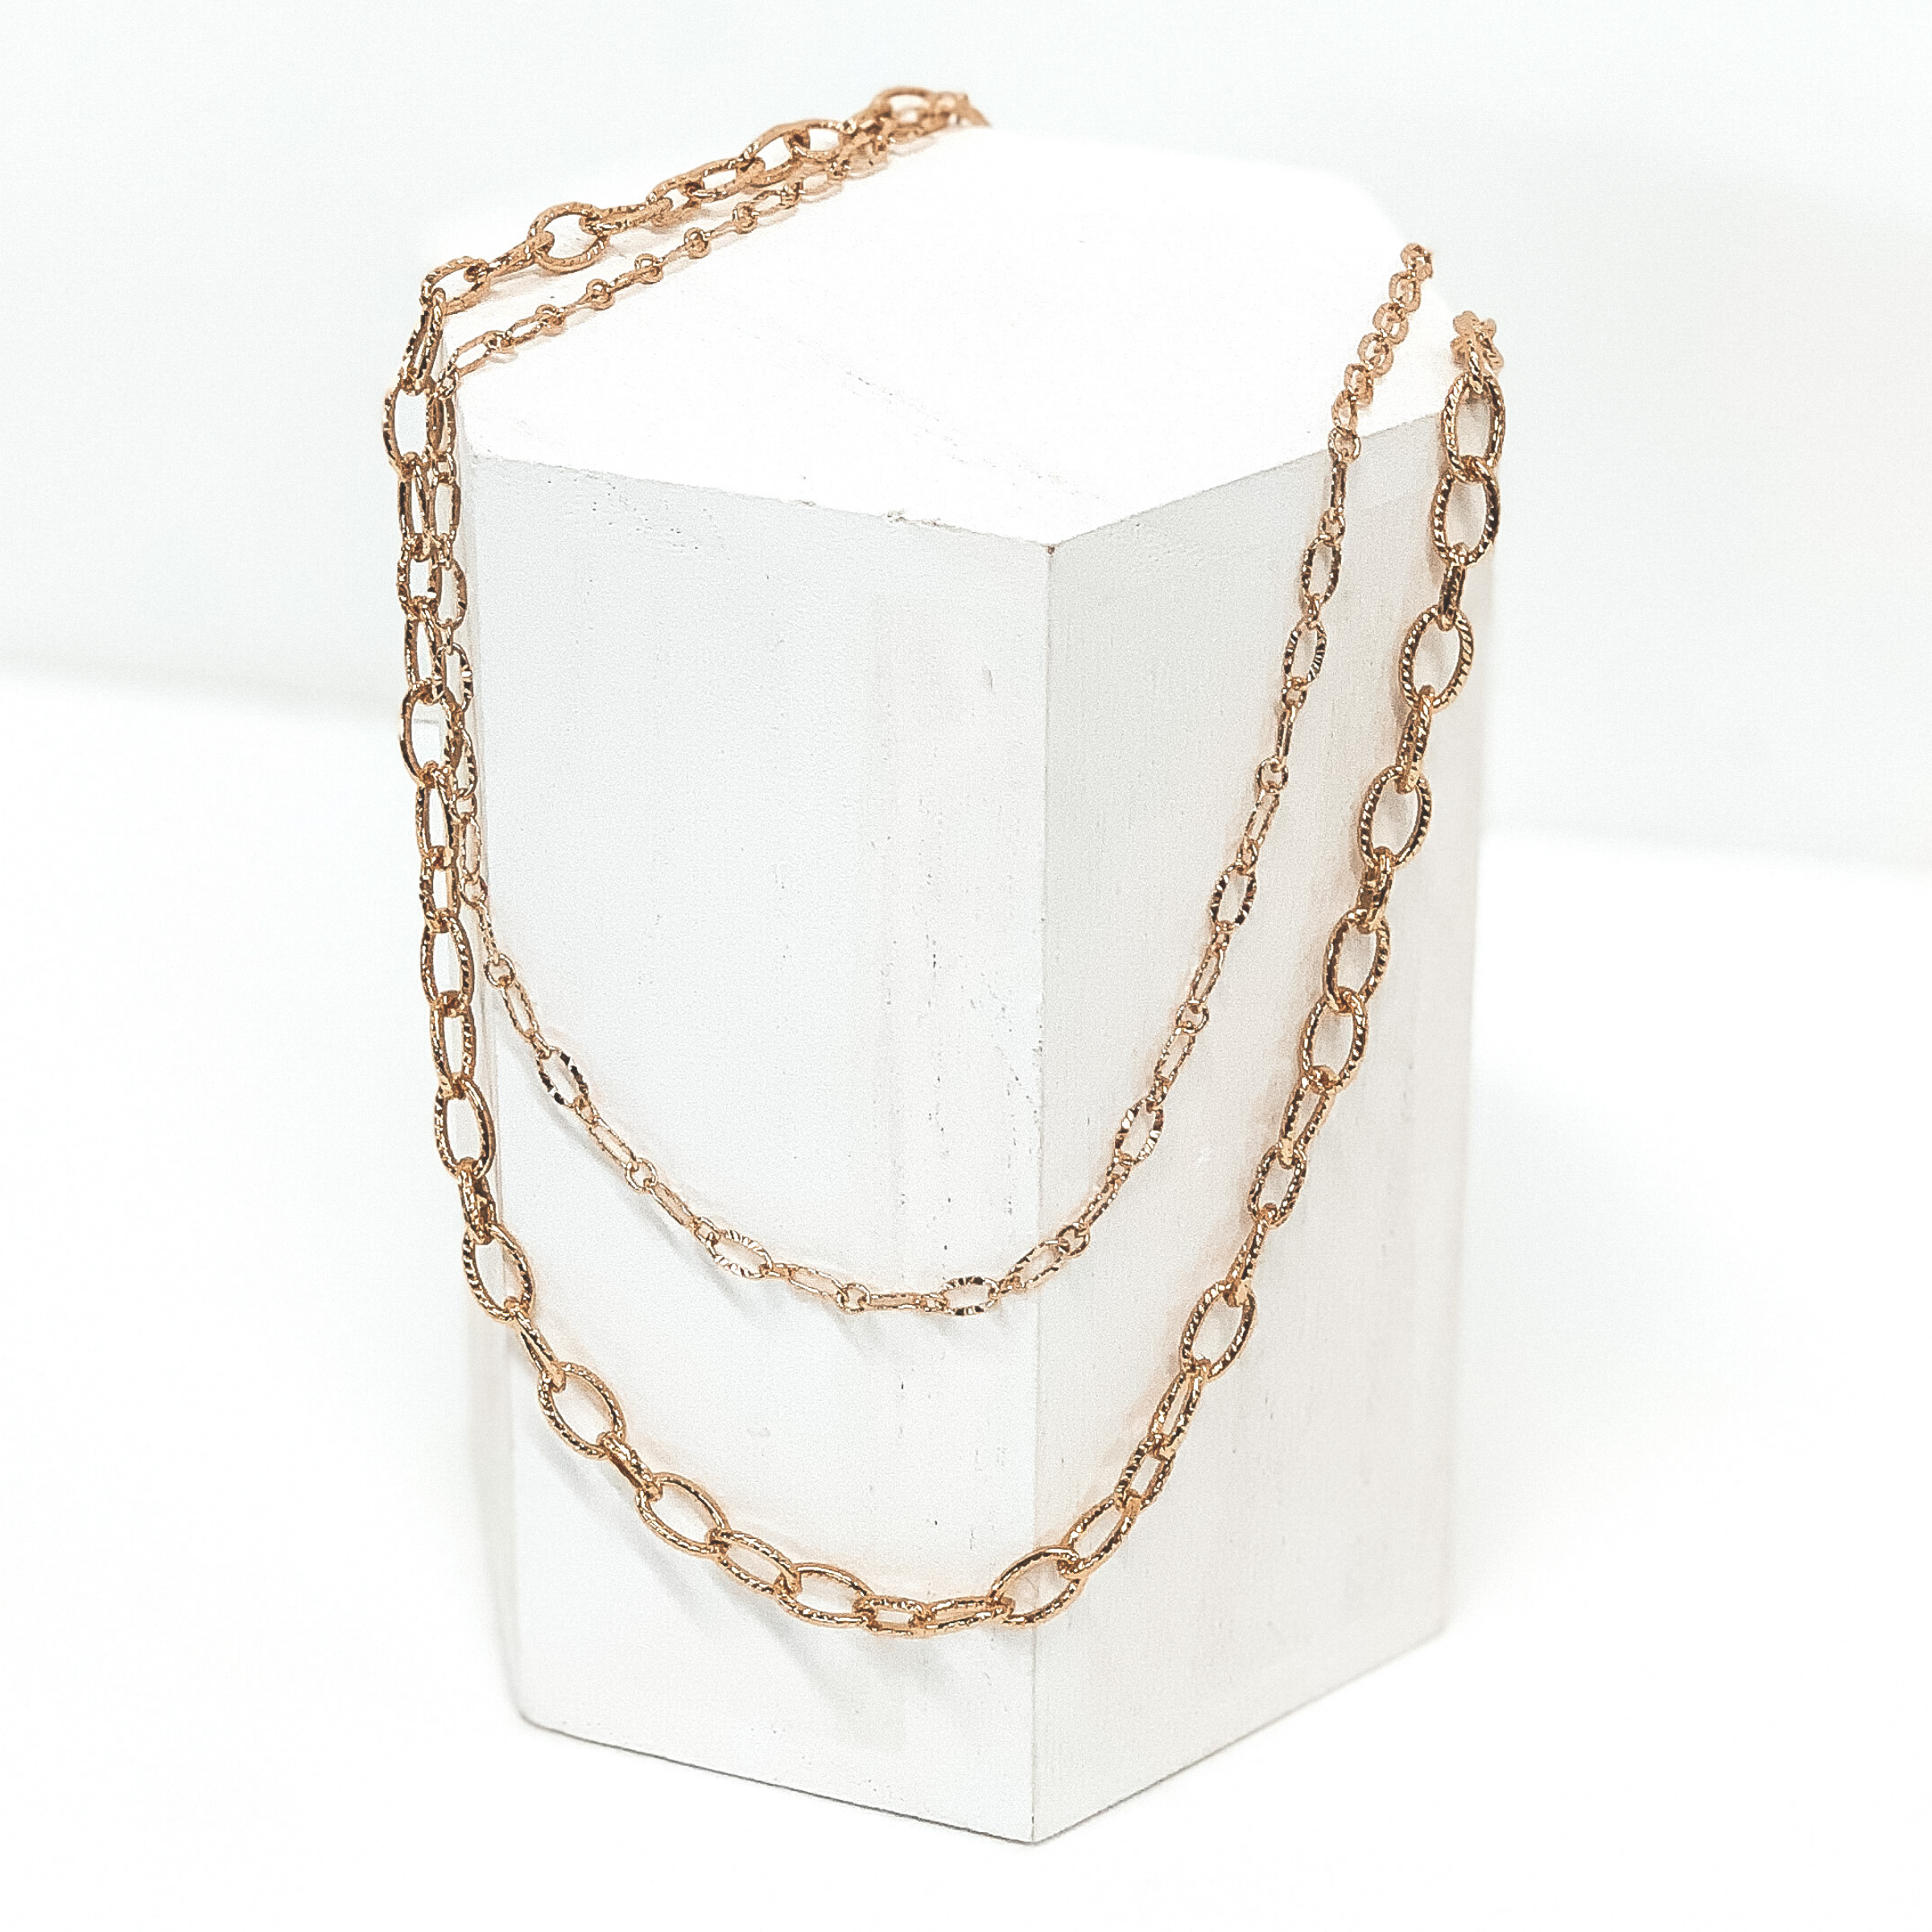 Two Strand Hammered Chain Link Necklace in Gold - Giddy Up Glamour Boutique